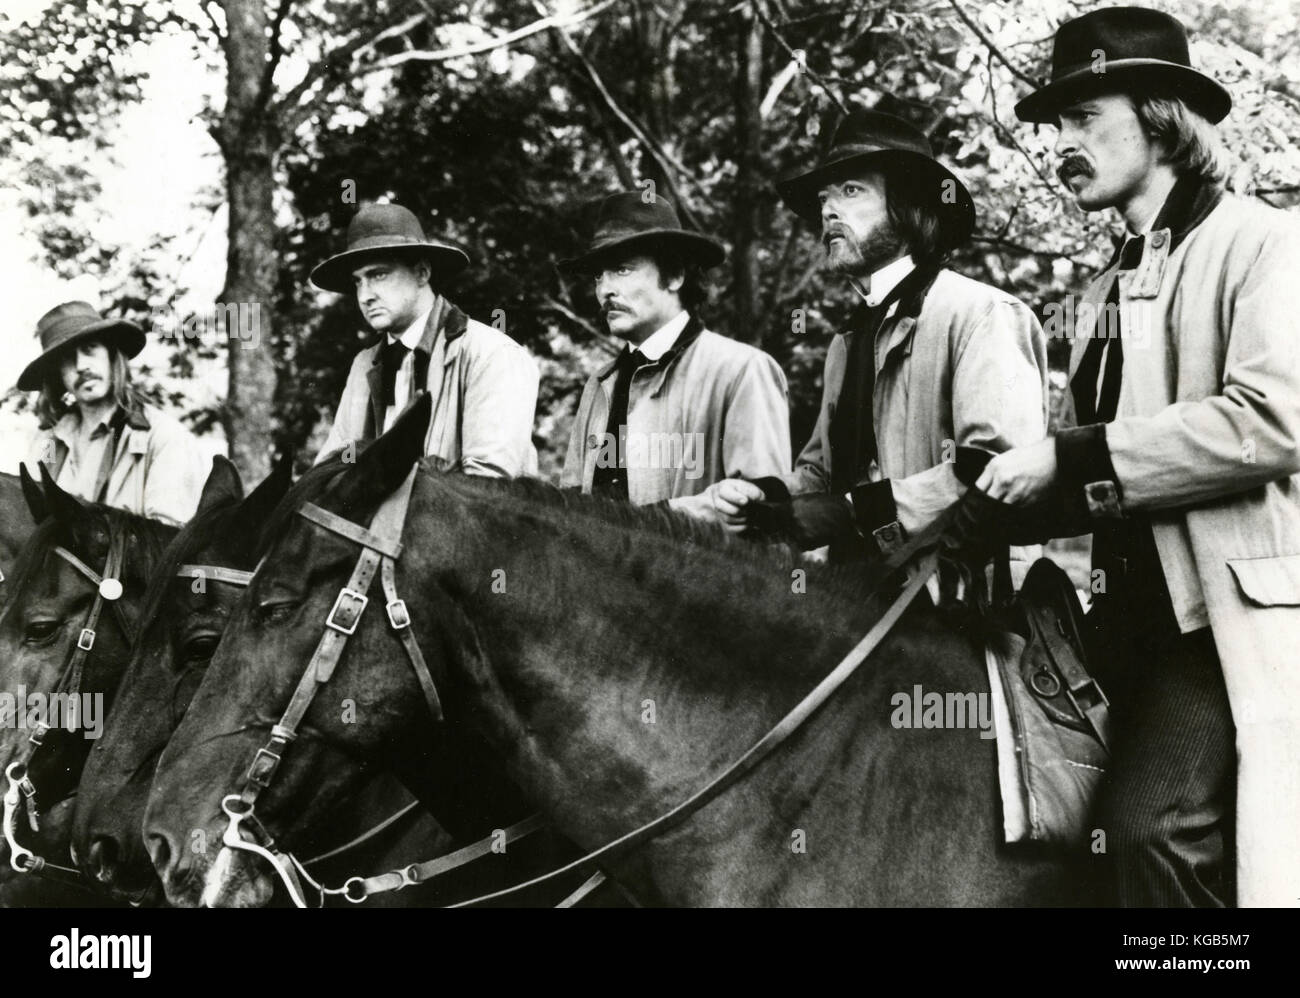 Actors Stacy Keach, James Keach, Randy Quaid, Dannis Quaid, and Keith Carradine in the movie The Long Riders, 1980 Stock Photo